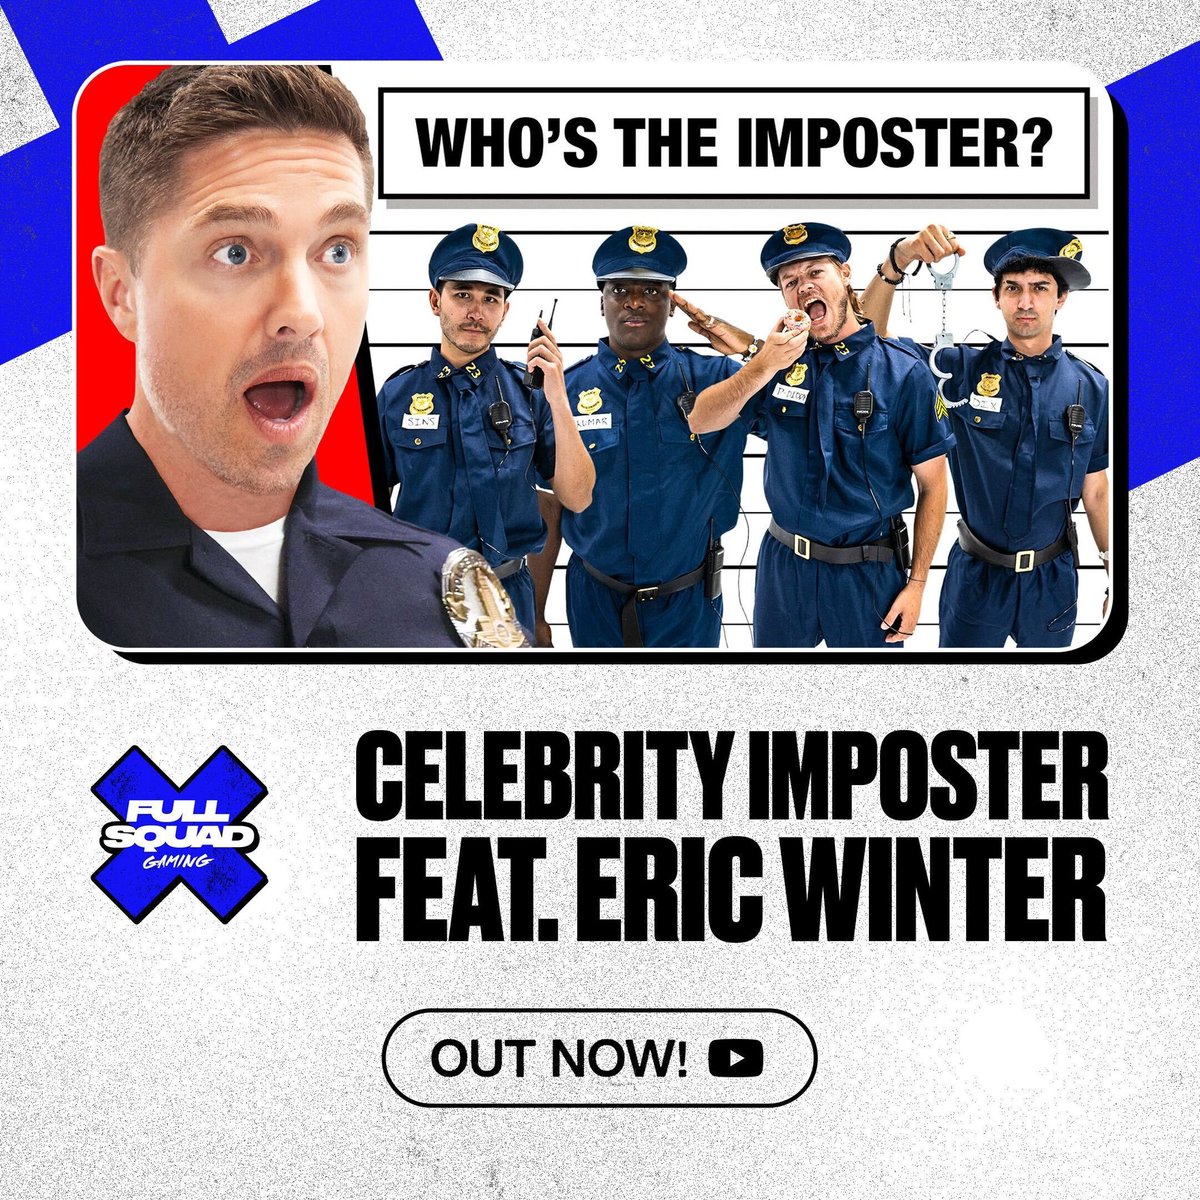 We're thrilled to announce the launch of our brand new “Celebrity Imposter Series” with our first guest, Eric Winter from ABC’s “The Rookie” 🔥 Tune in at the link below👇